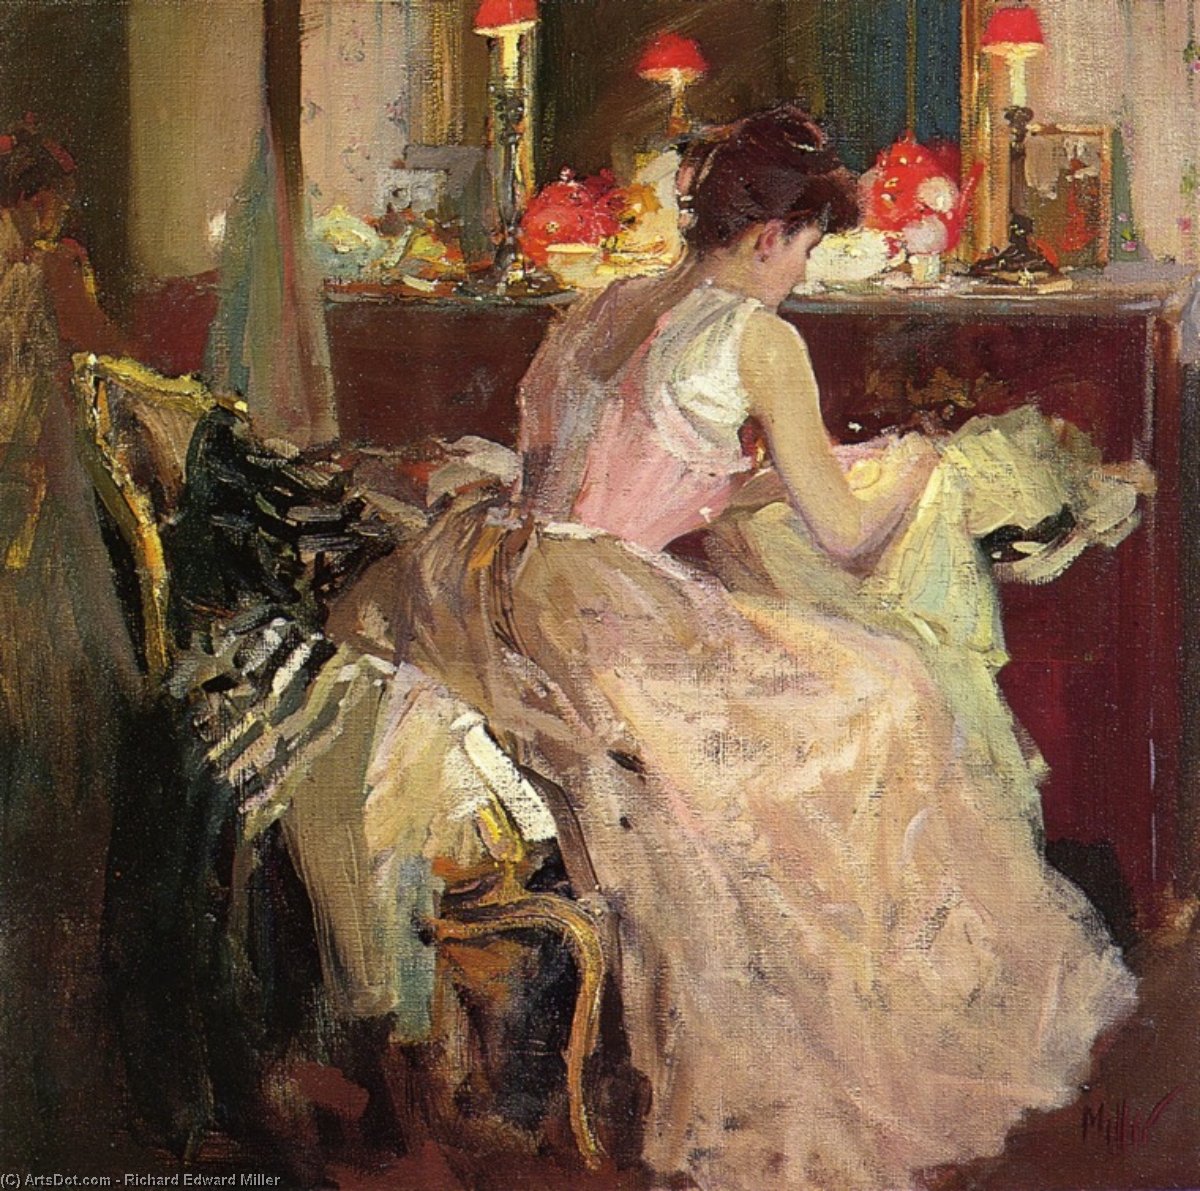 Order Paintings Reproductions Sewing By Lamp Light by Richard Edward Miller (1875-1943, United States) | ArtsDot.com